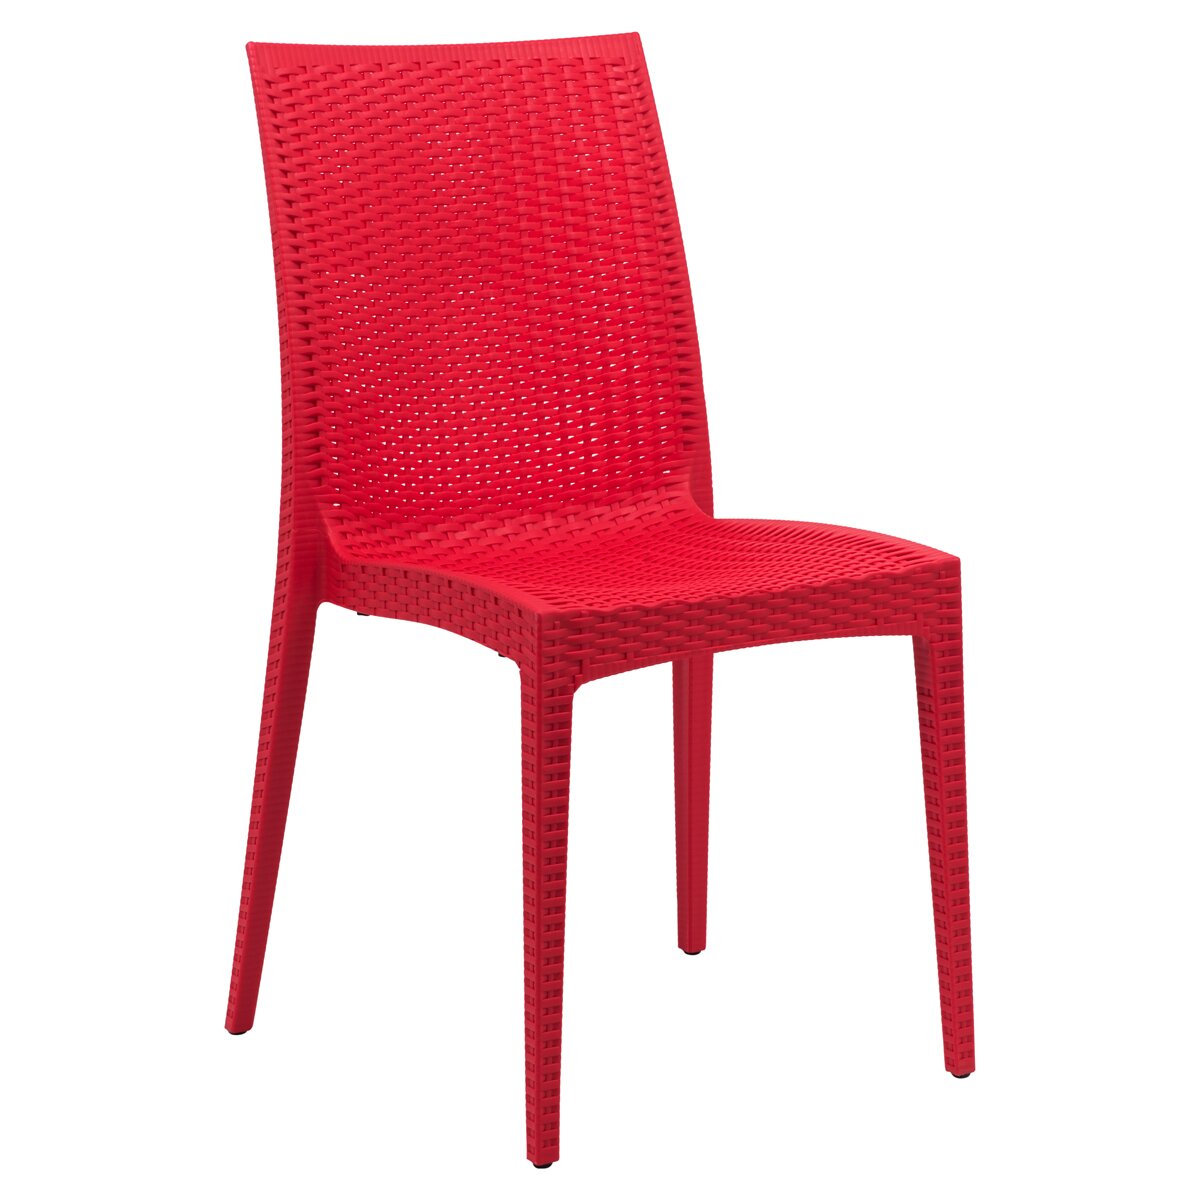 Quade Stacking Patio Dining Chair, Assembled, Suitable for indoor and outdoor use - image 4 of 6